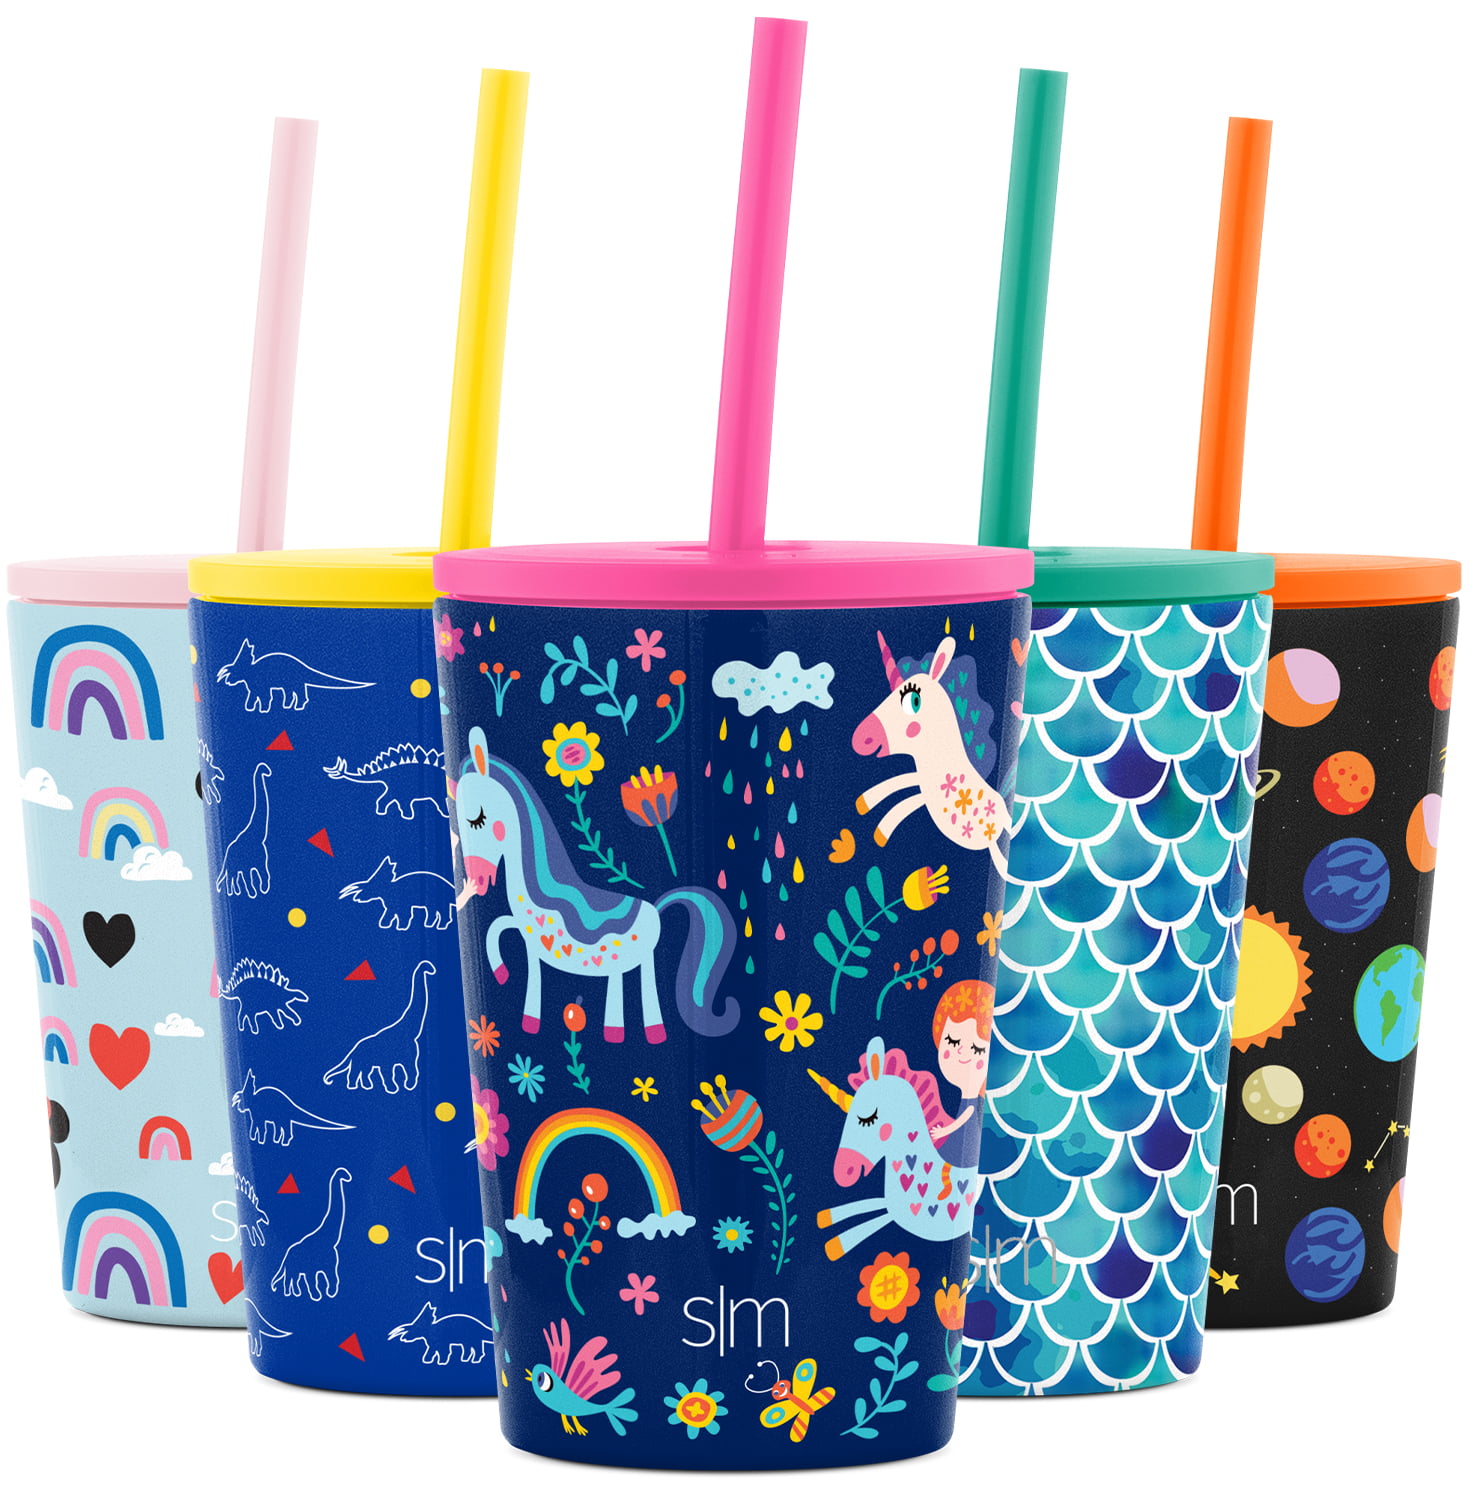 Unicorn and Rainbows. 12 Oz Insulated Tumbler. Double-walled. 